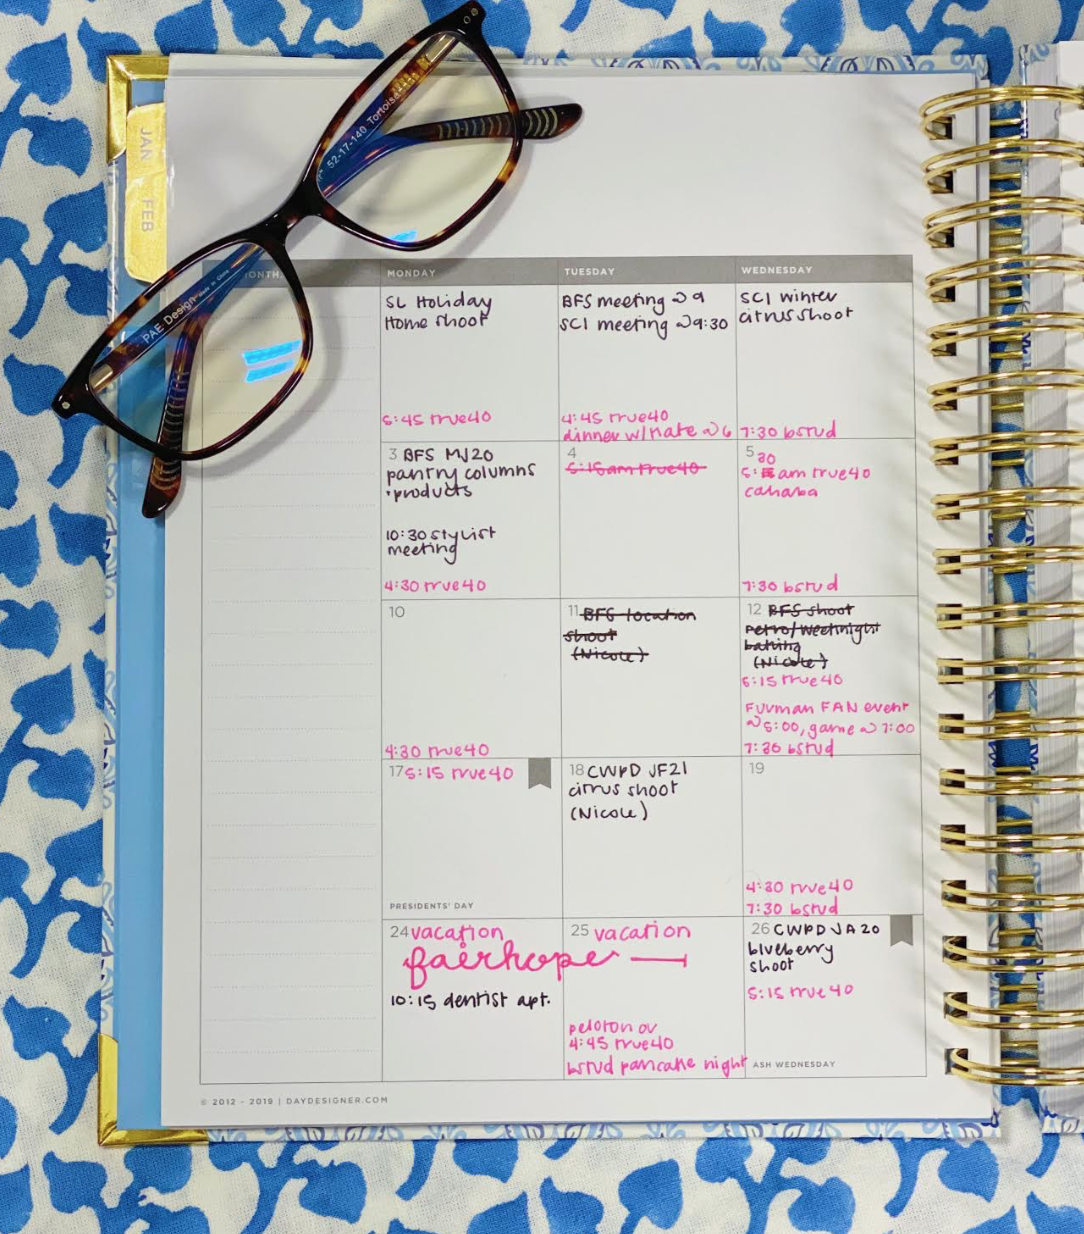 how to organize your day designer planner  Day designer planner, Planner  organization, Day designer